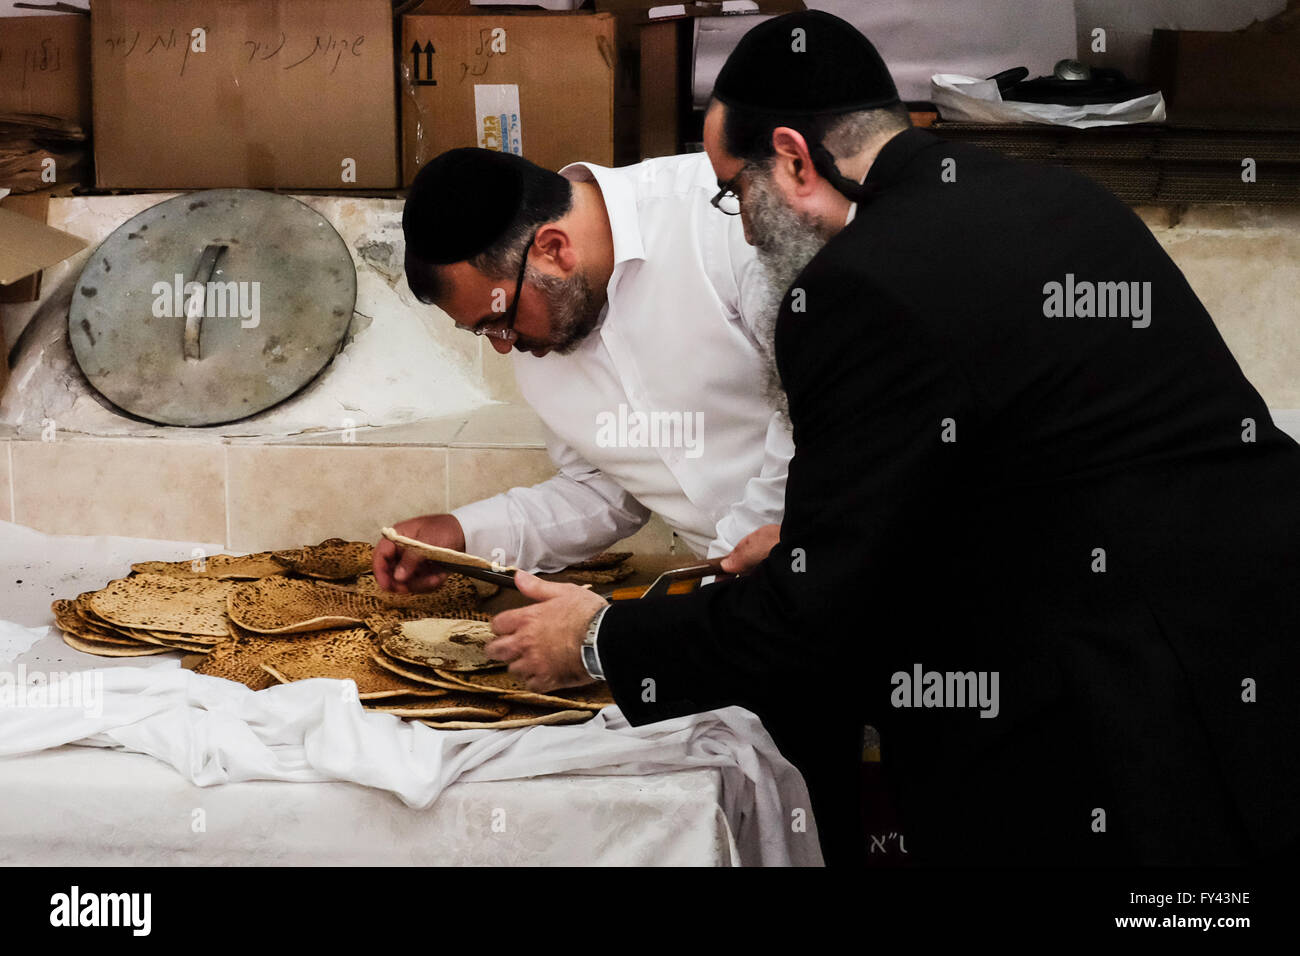 Jerusalem, Israel. 21st April, 2016. Jewish men prepare matzah, unleavened bread, for Passover, symbolic of the biblical exodus of the ancient Hebrews from slavery in Egypt to freedom, in which not having had time to wait for dough to rise before leaving Egypt, they journeyed into the desert with unleavened bread. Credit:  Nir Alon/Alamy Live News Stock Photo